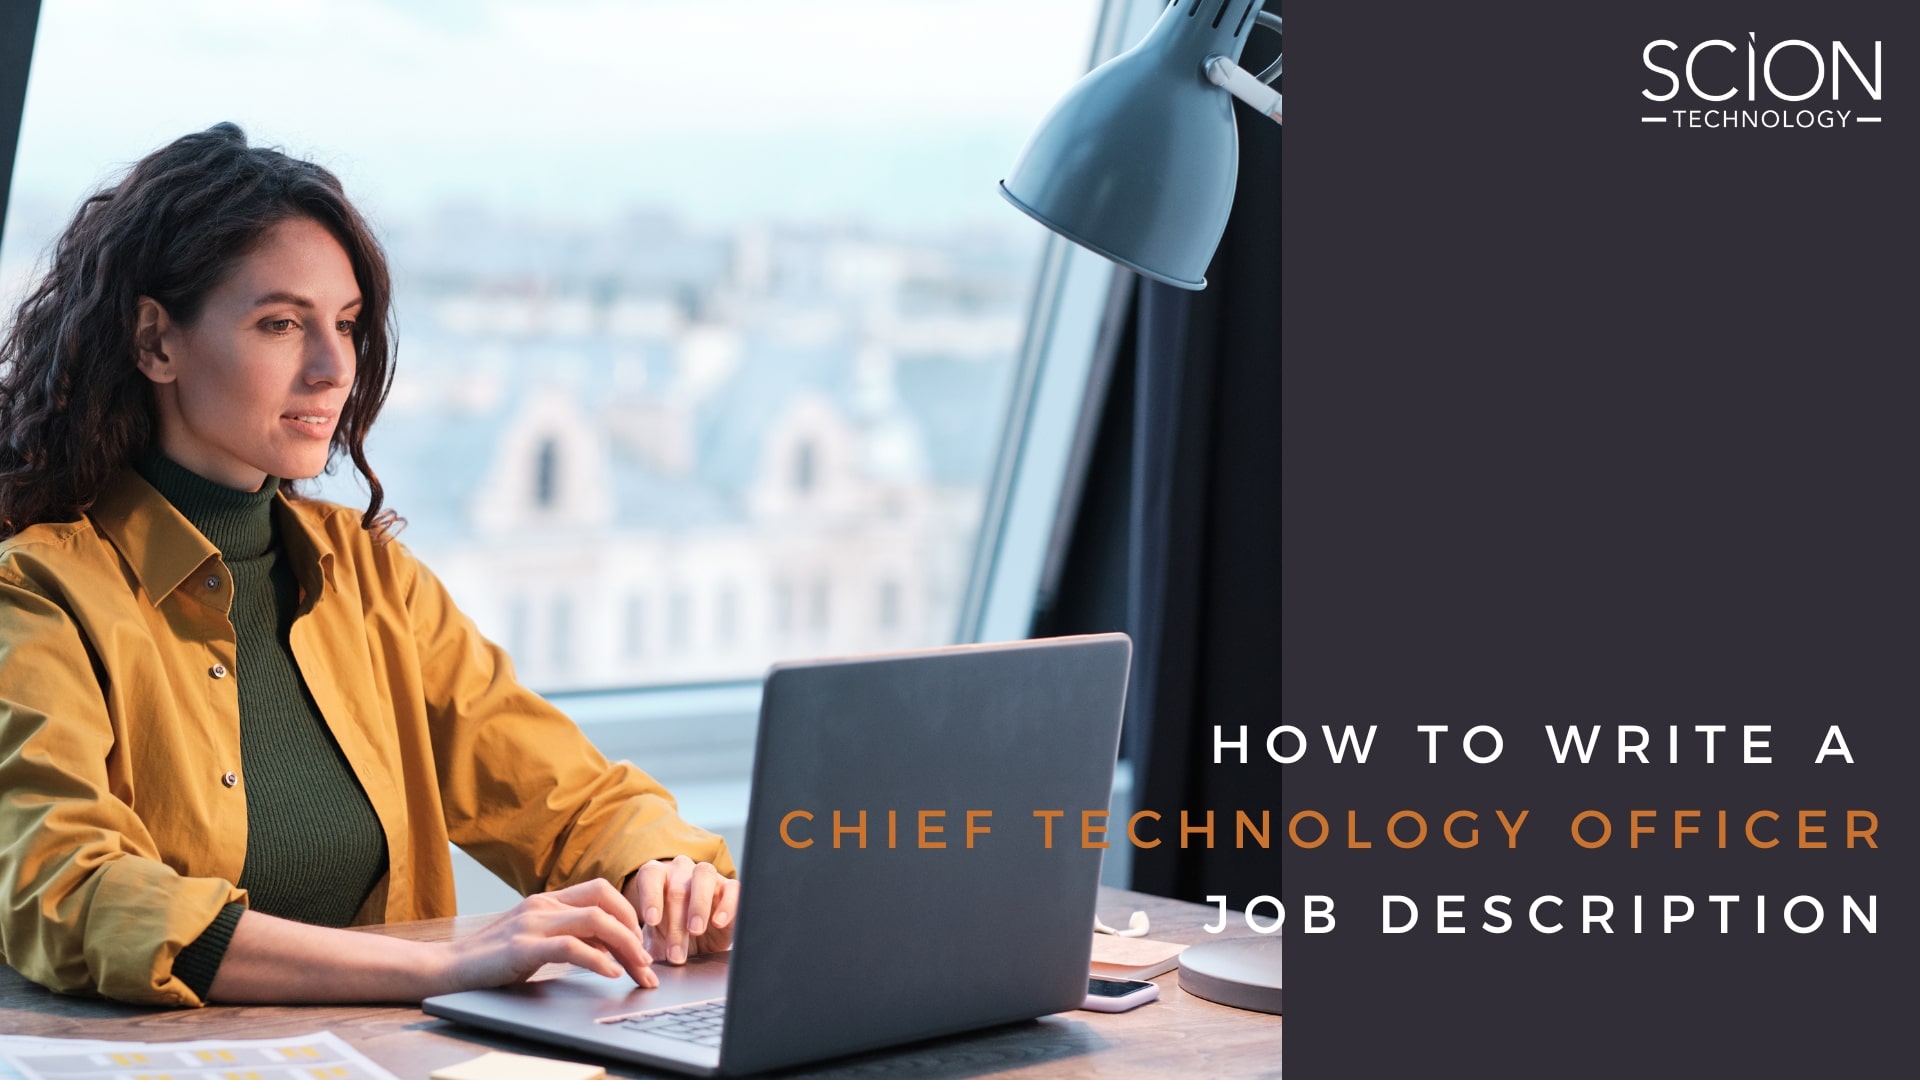 How to Write a Chief Technology Officer Job Description